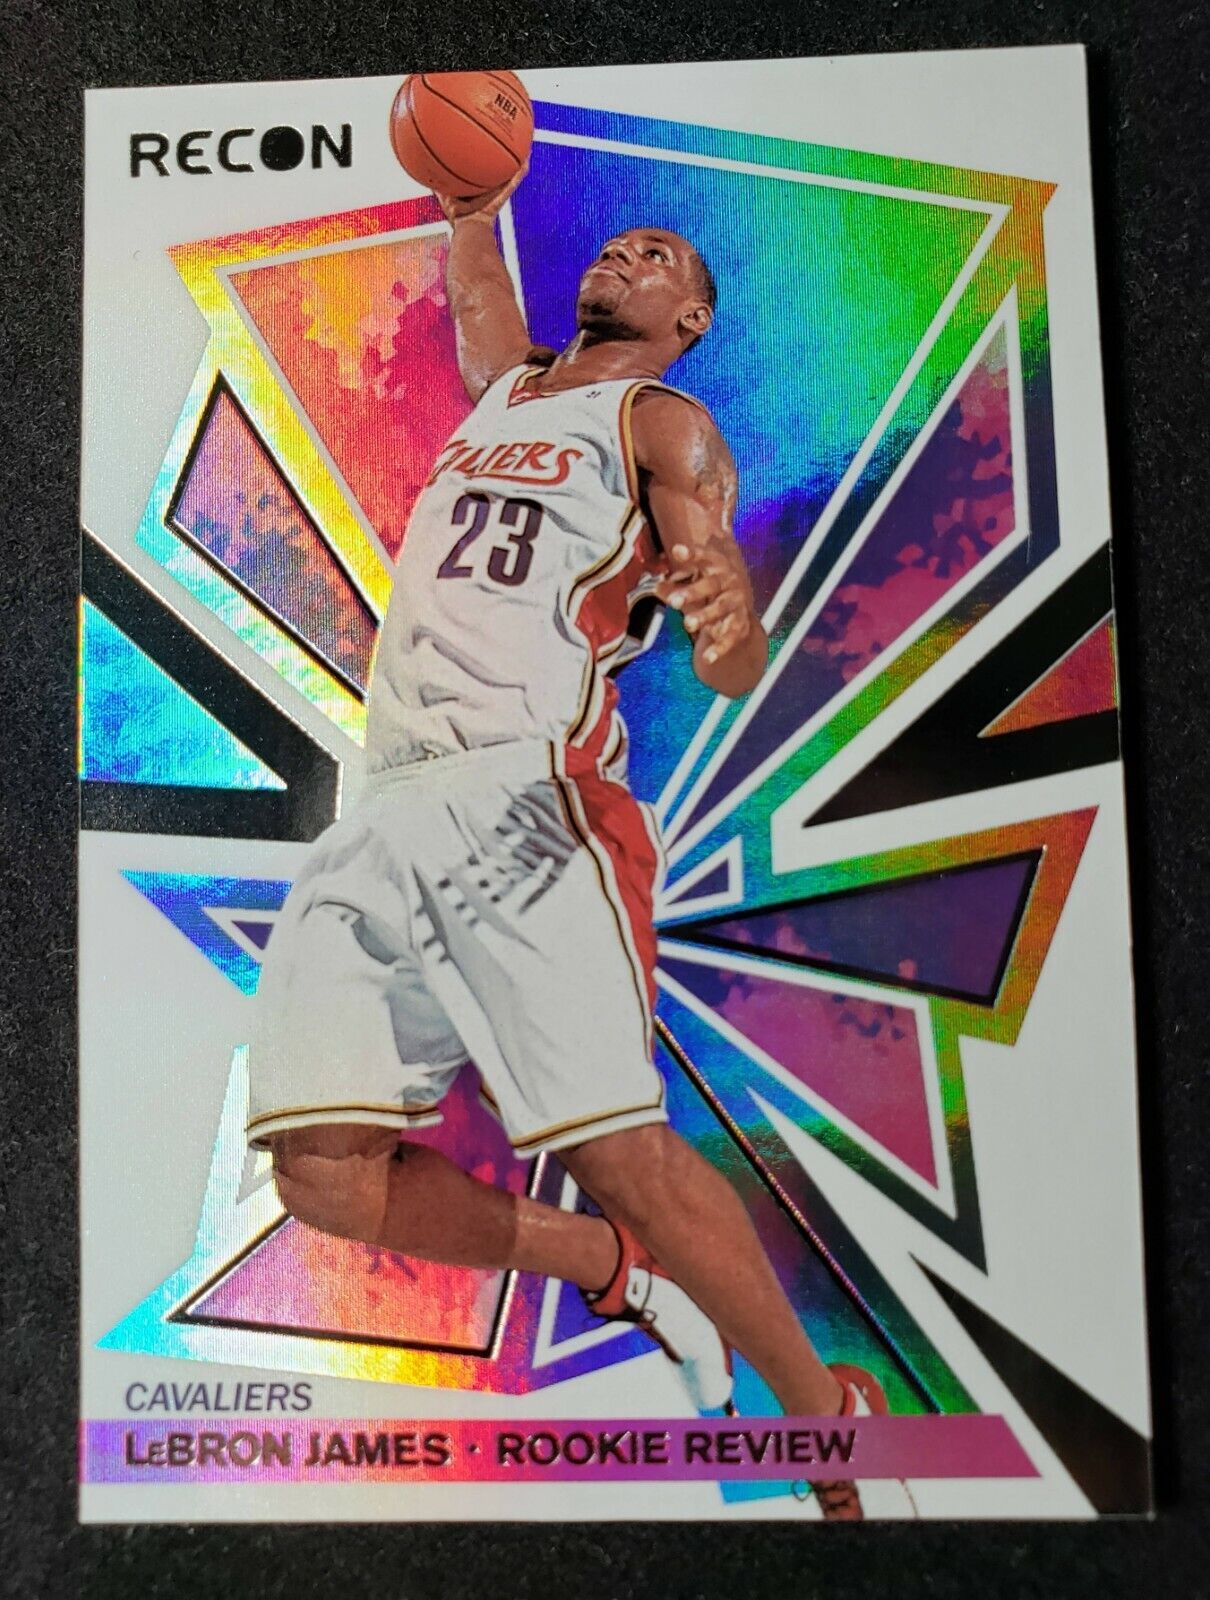 2020-2021 Panini Recon Basketball LeBron James Rookie Review #8